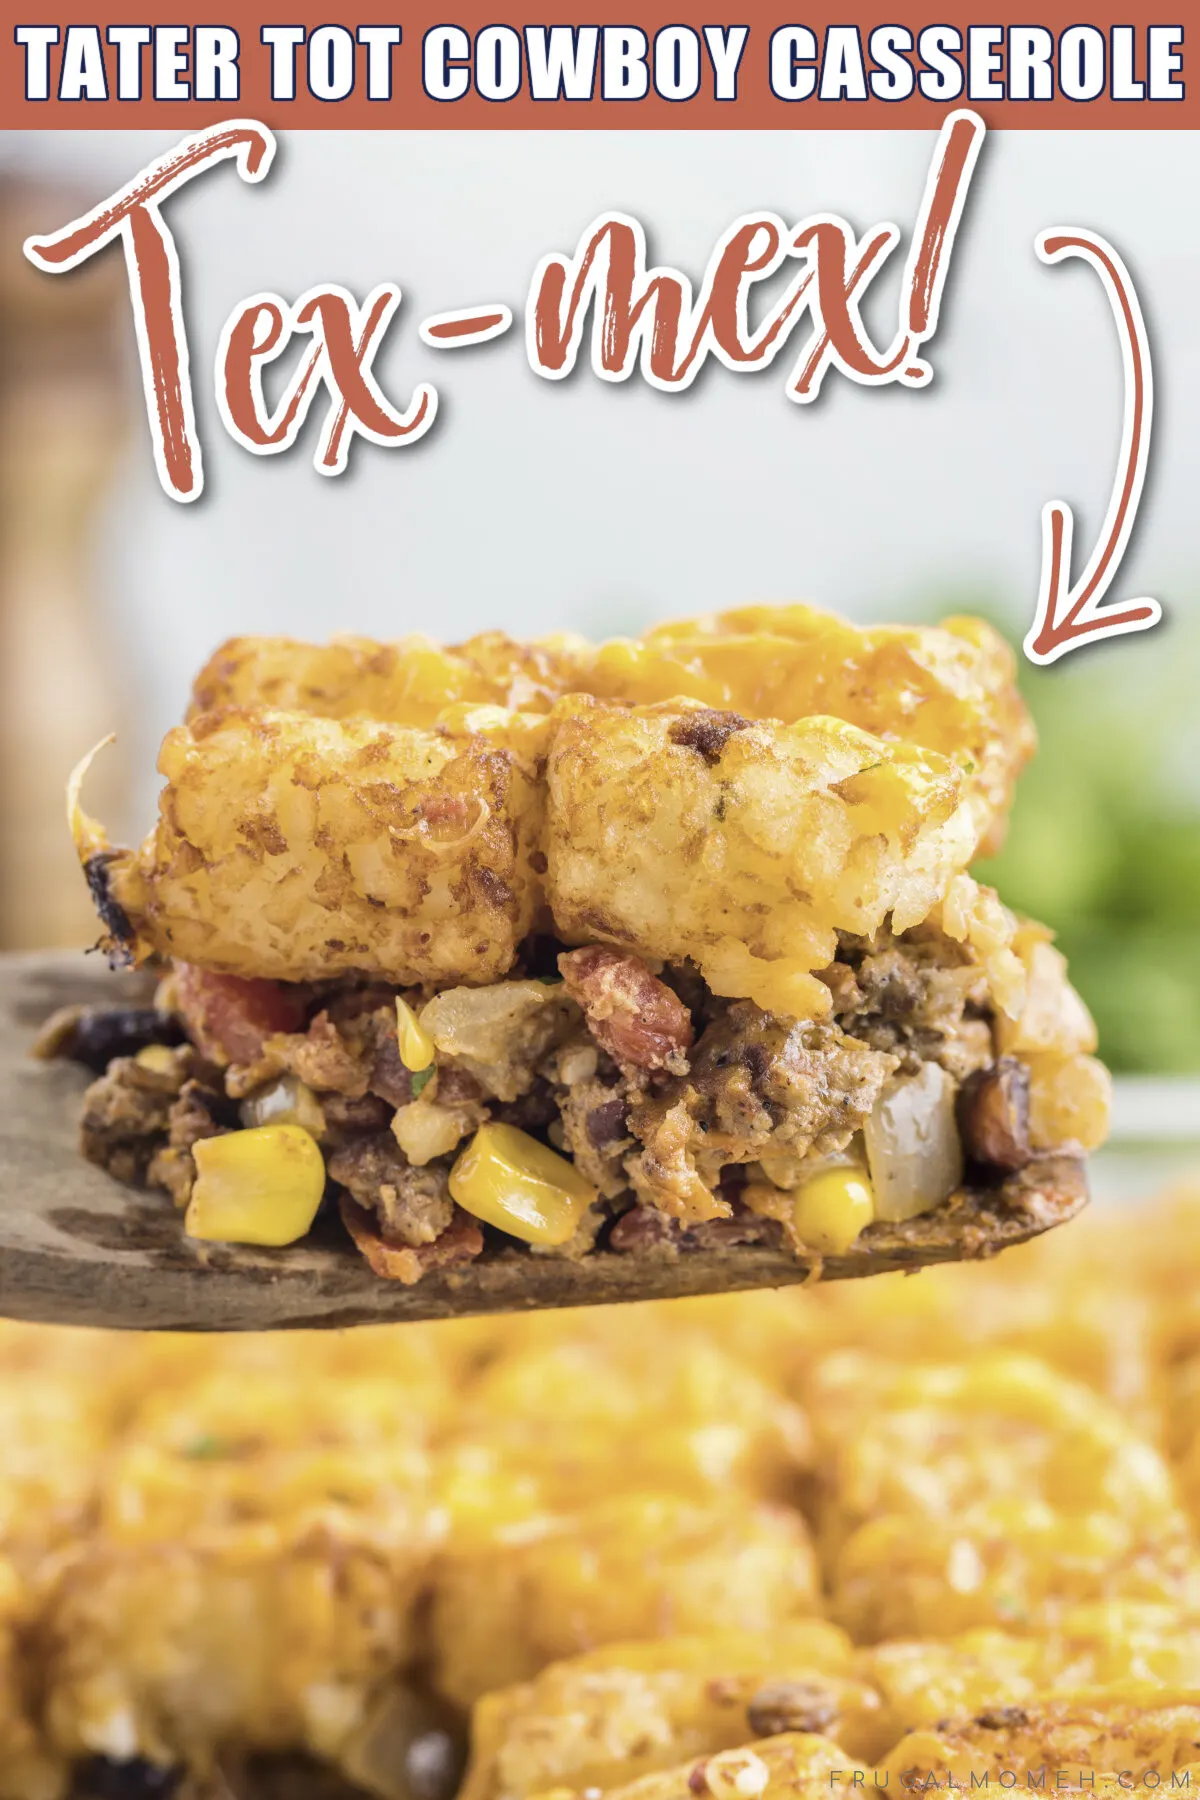 This easy cowboy casserole recipe is the perfect way to feed a hungry crowd! Loaded with Tex-mex flavour, this dish is sure to please.